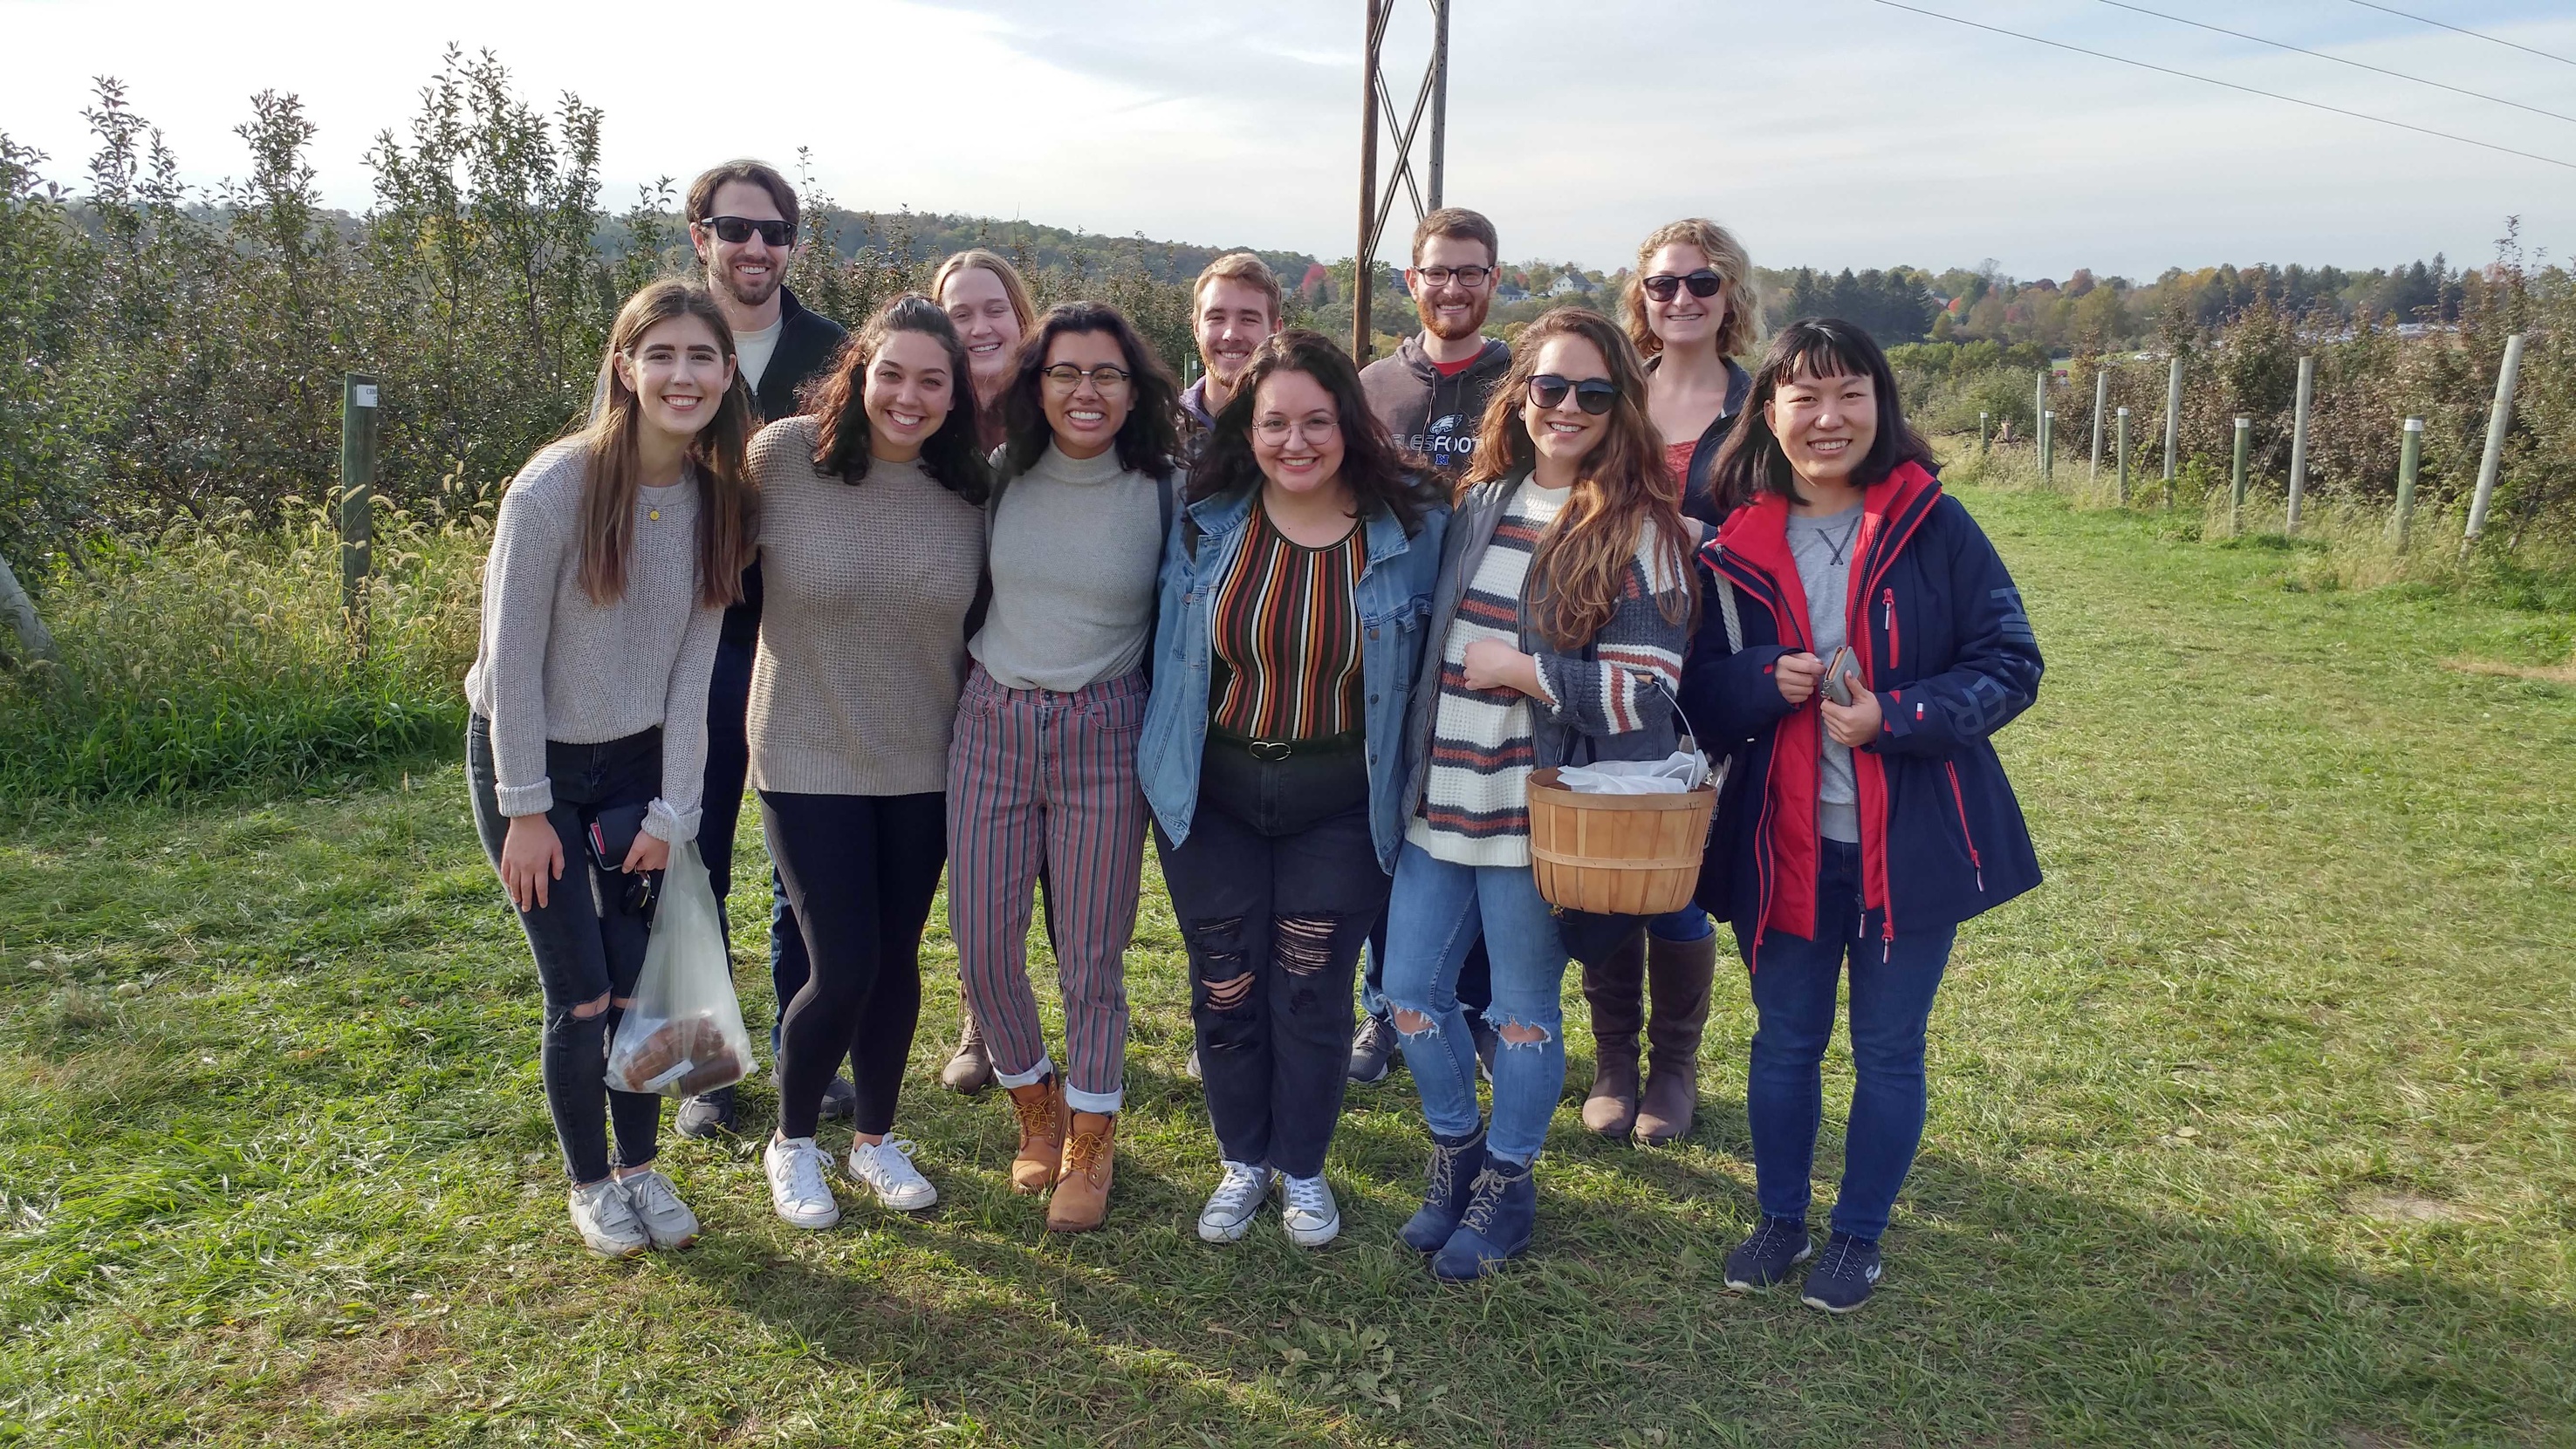 Wilson's orchard outing in fall 2019